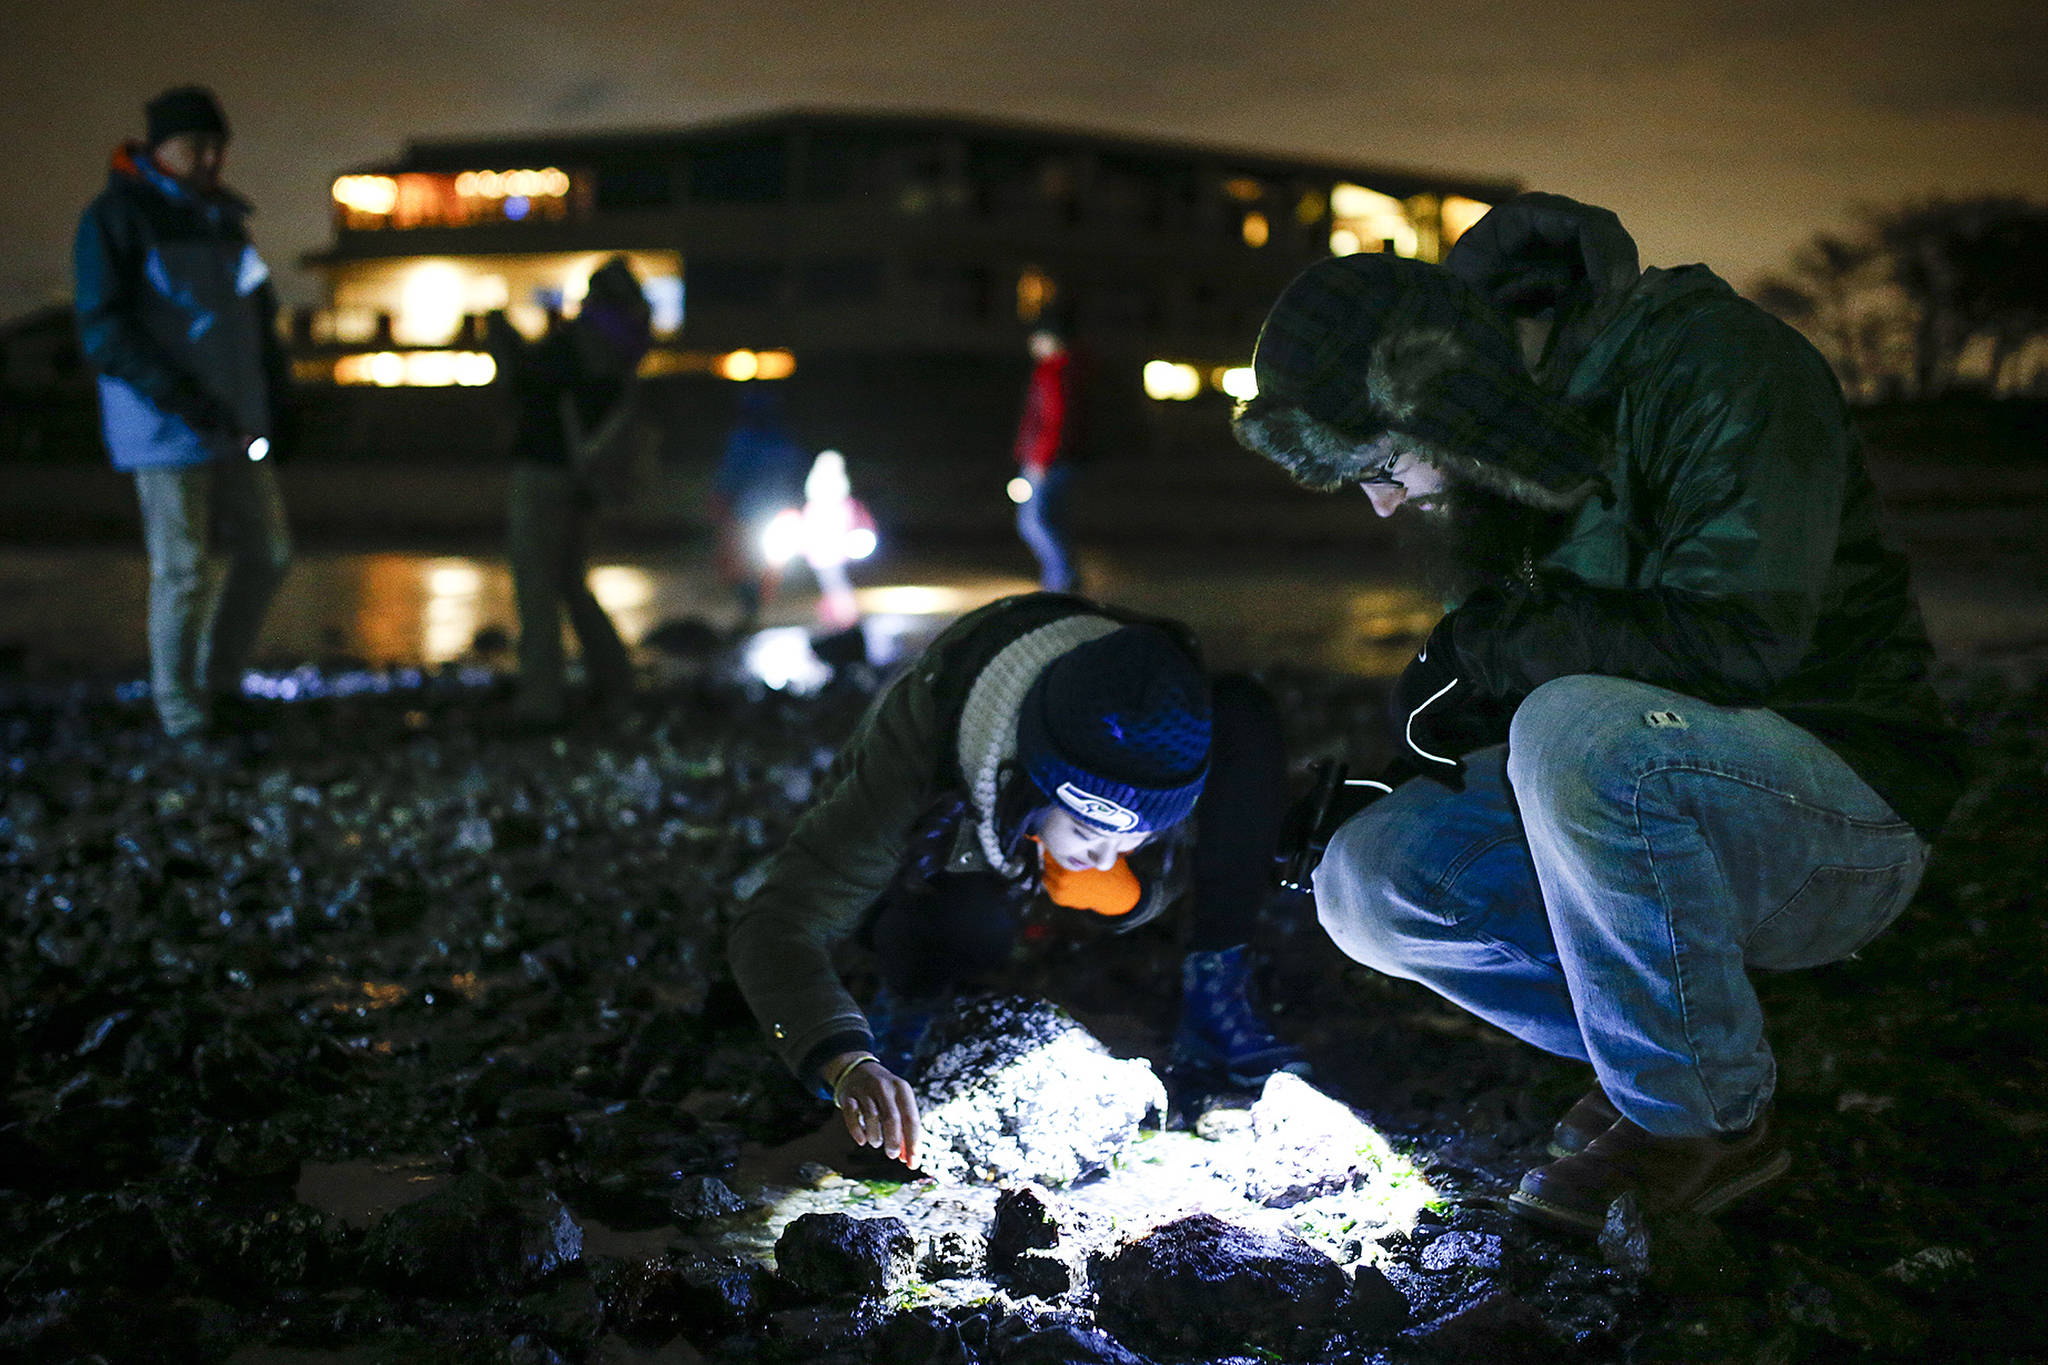 Ian Terry / The Herald Laura Han (center), of Lynnwood, and Derek Arterburn (right), of Everett, use the glow of a flashlight to look for marine life during a beach walk after dark in Edmonds on Tuesday, Feb. 7. Photo taken on 02072017                                Laura Han (center), of Lynnwood, and Derek Arterburn (right), of Everett, use the glow of a flashlight to look for marine life during a Starlight Beach Walk after dark in Edmonds in 2017. The next one is scheduled for Jan. 21 at Olympic Beach. (Ian Terry / Herald file)